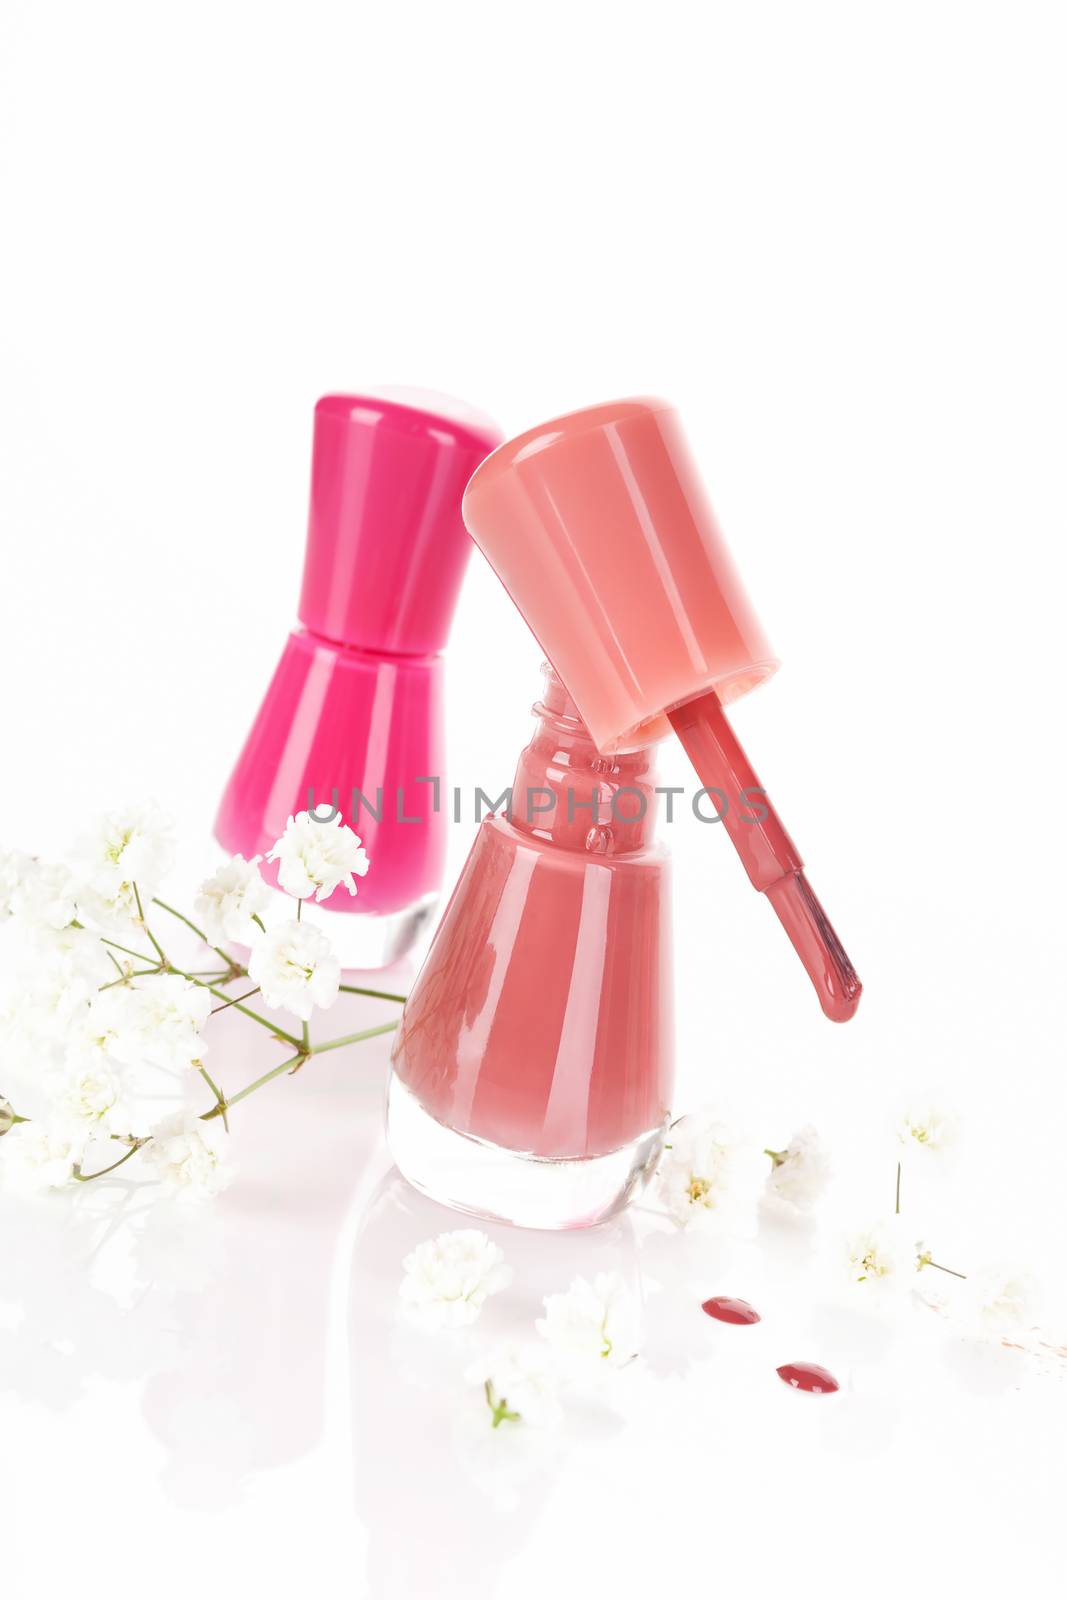 Red and pink nail polish with white flower isolated on white background with reflection. Luxurious feminine beauty background.